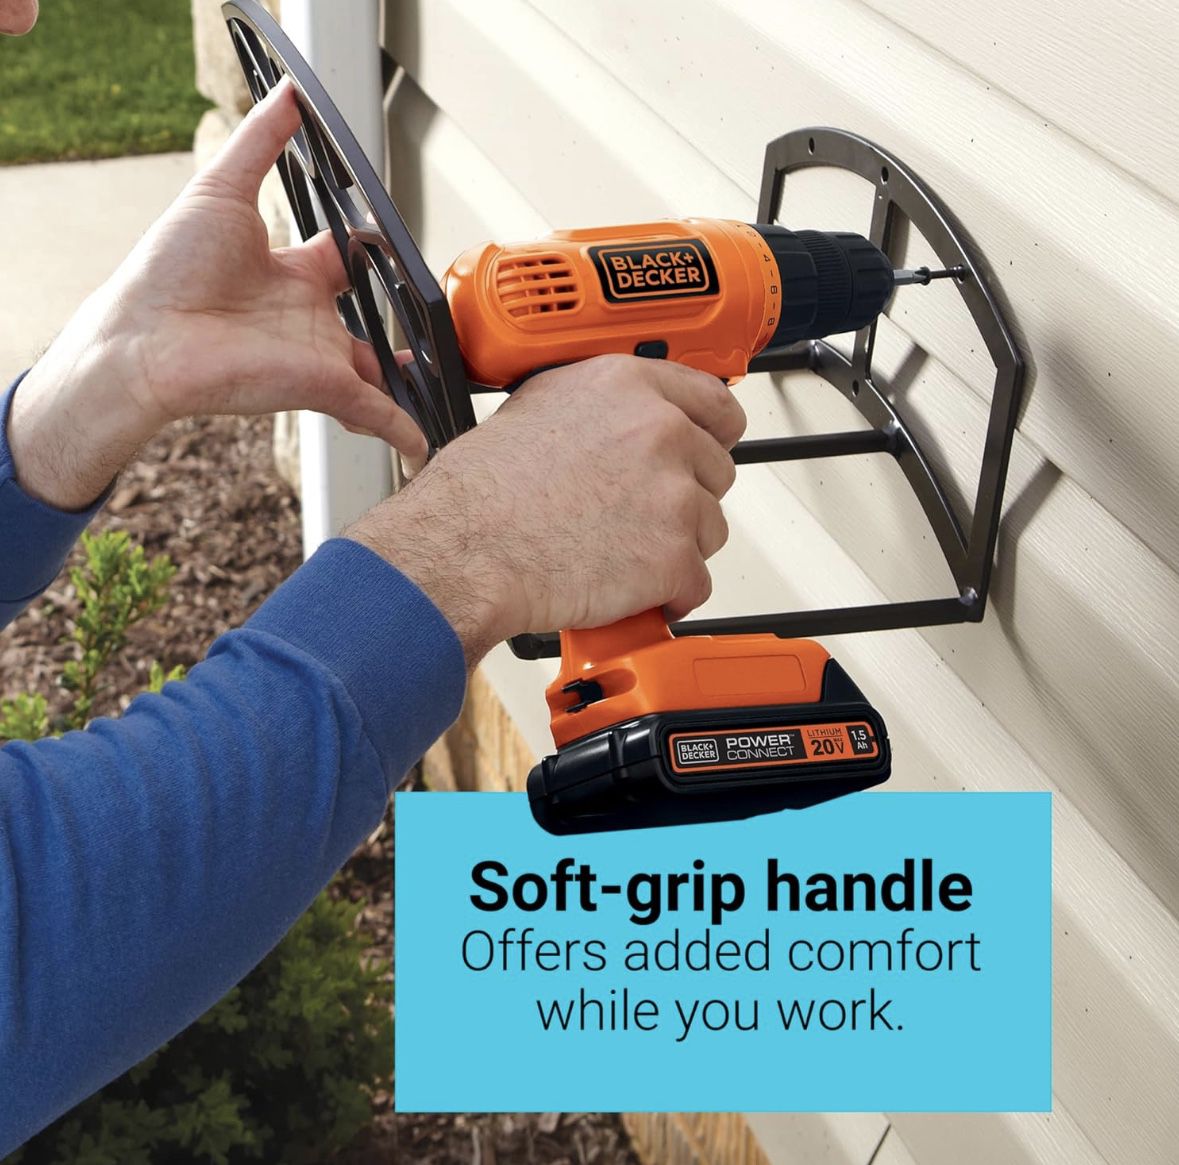 BLACK+DECKER 20V MAX* POWERECONNECT Cordless Drill/Driver + 30 pc. Kit  (LD120VA) for Sale in Queens, NY - OfferUp